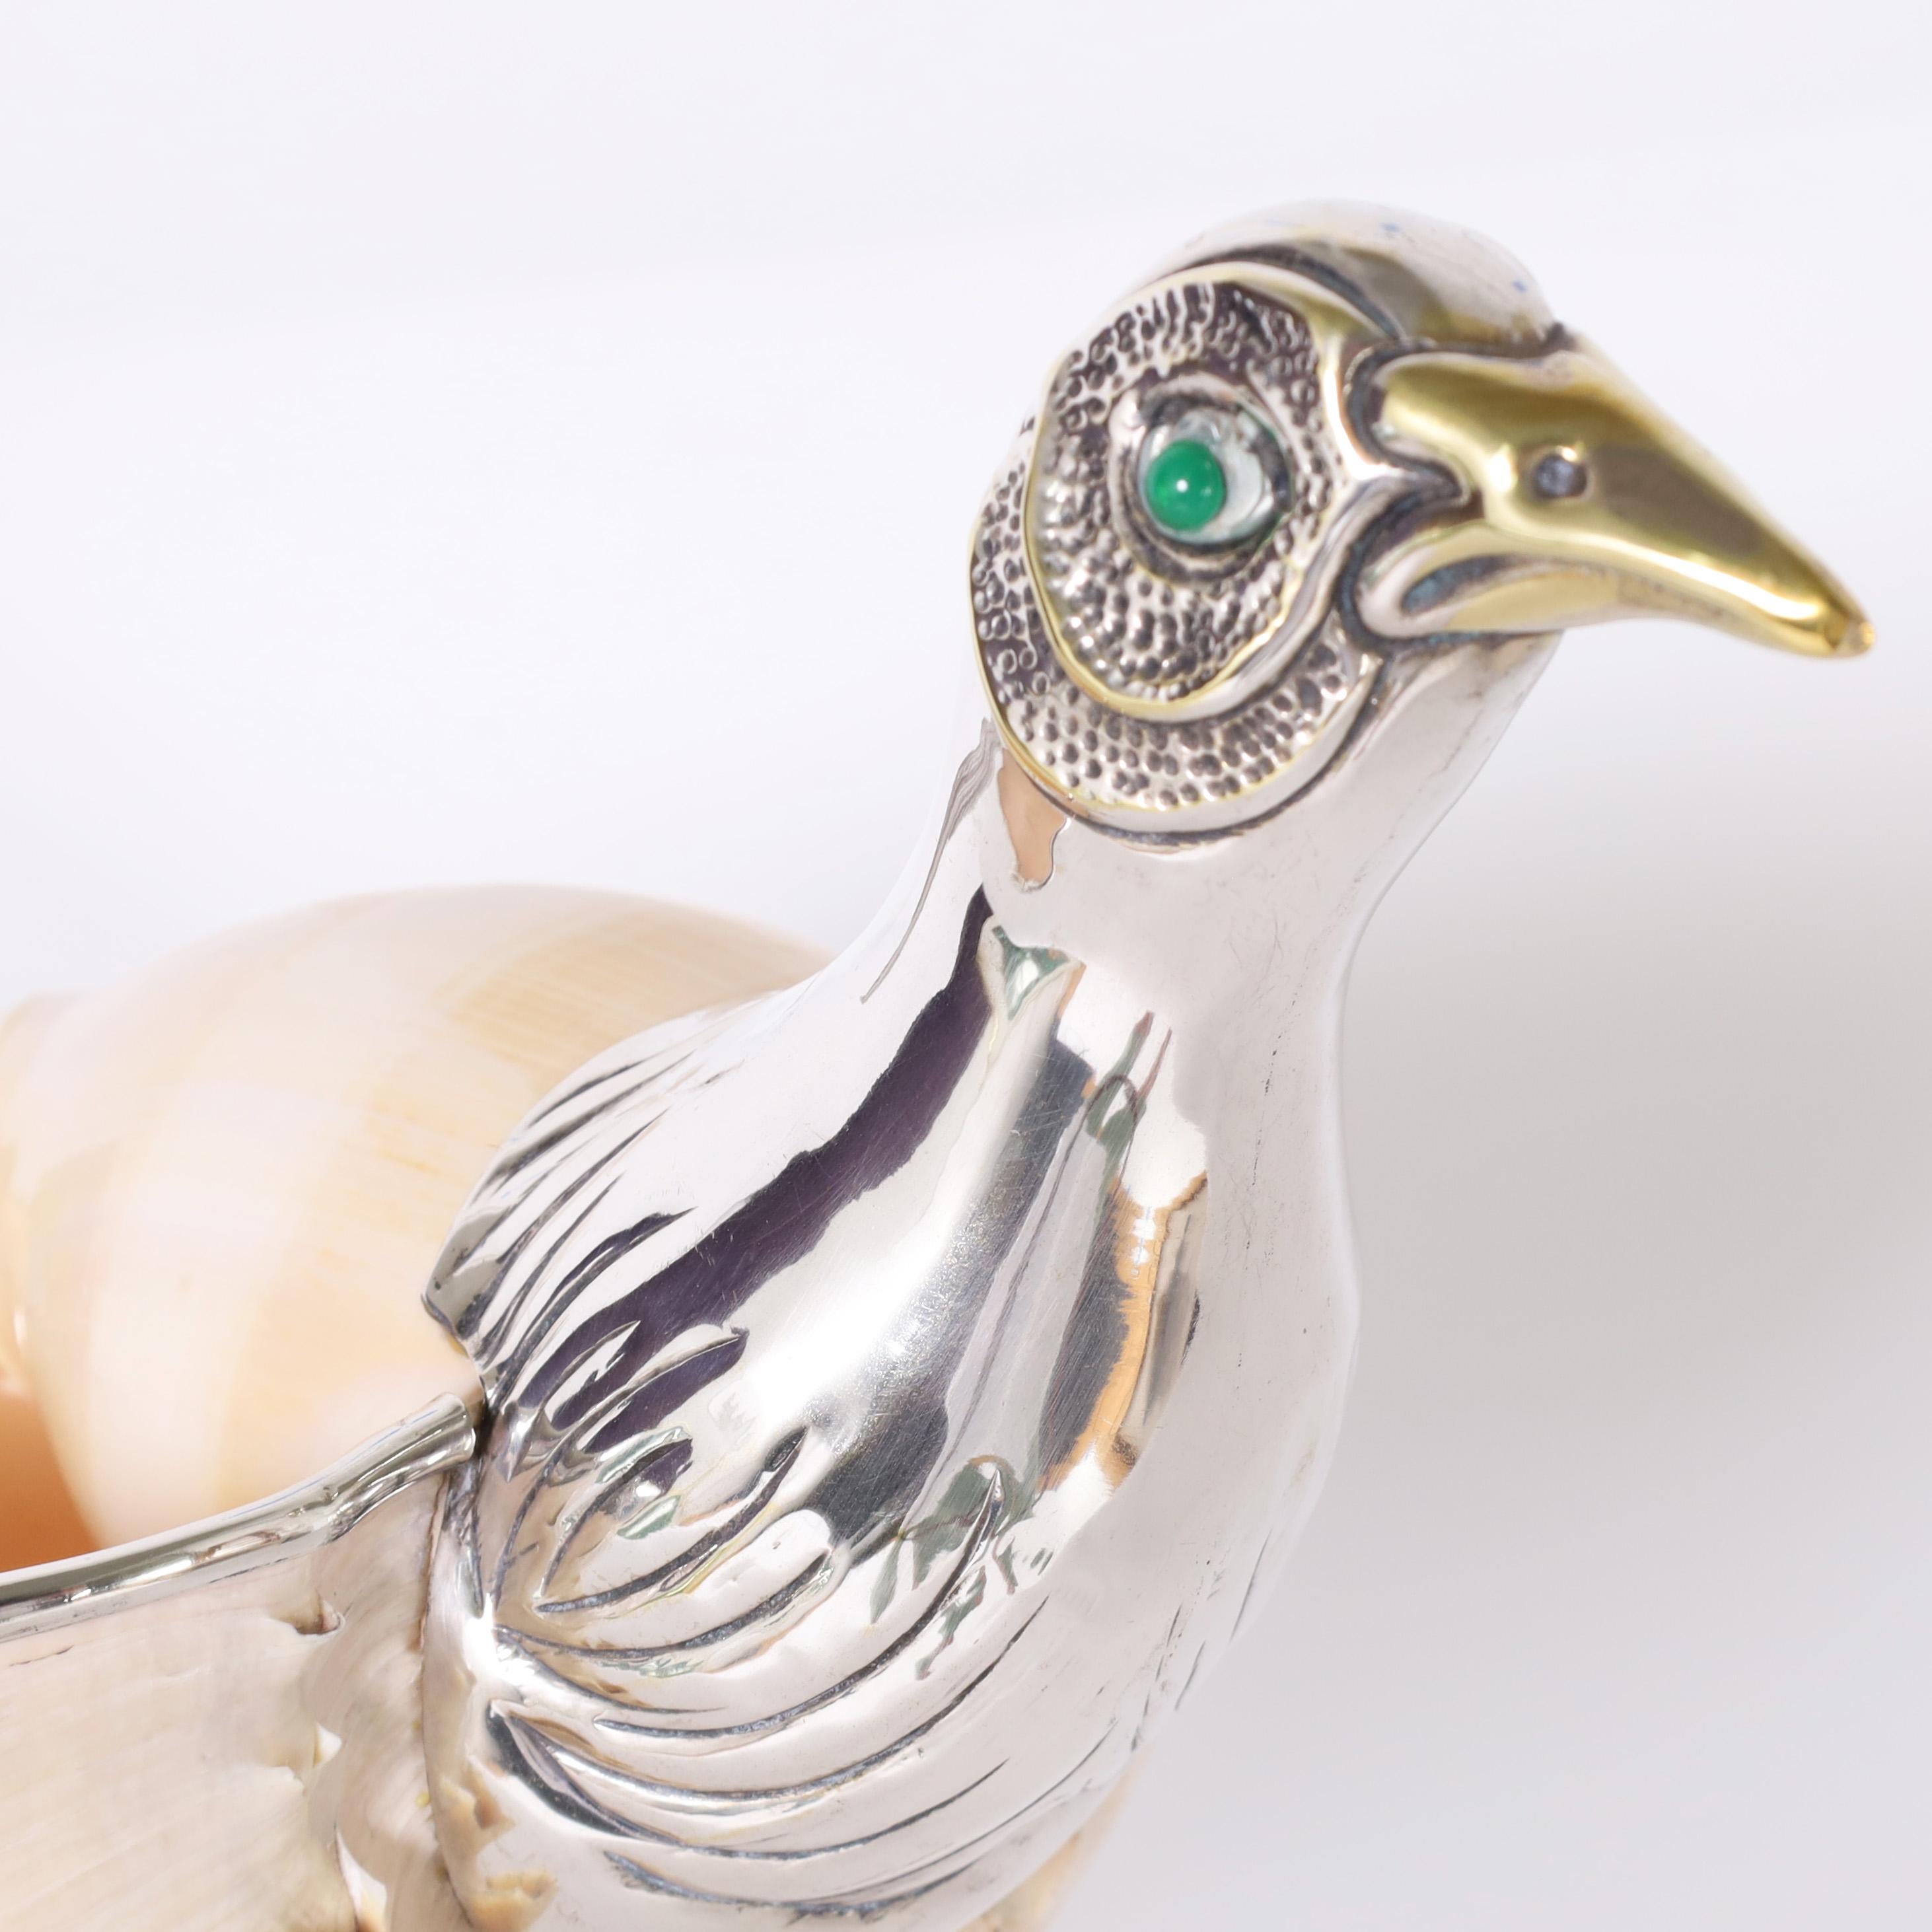 Italian Vintage Silver Plate and Conch Shell Bird Sculpture by Binazzi For Sale